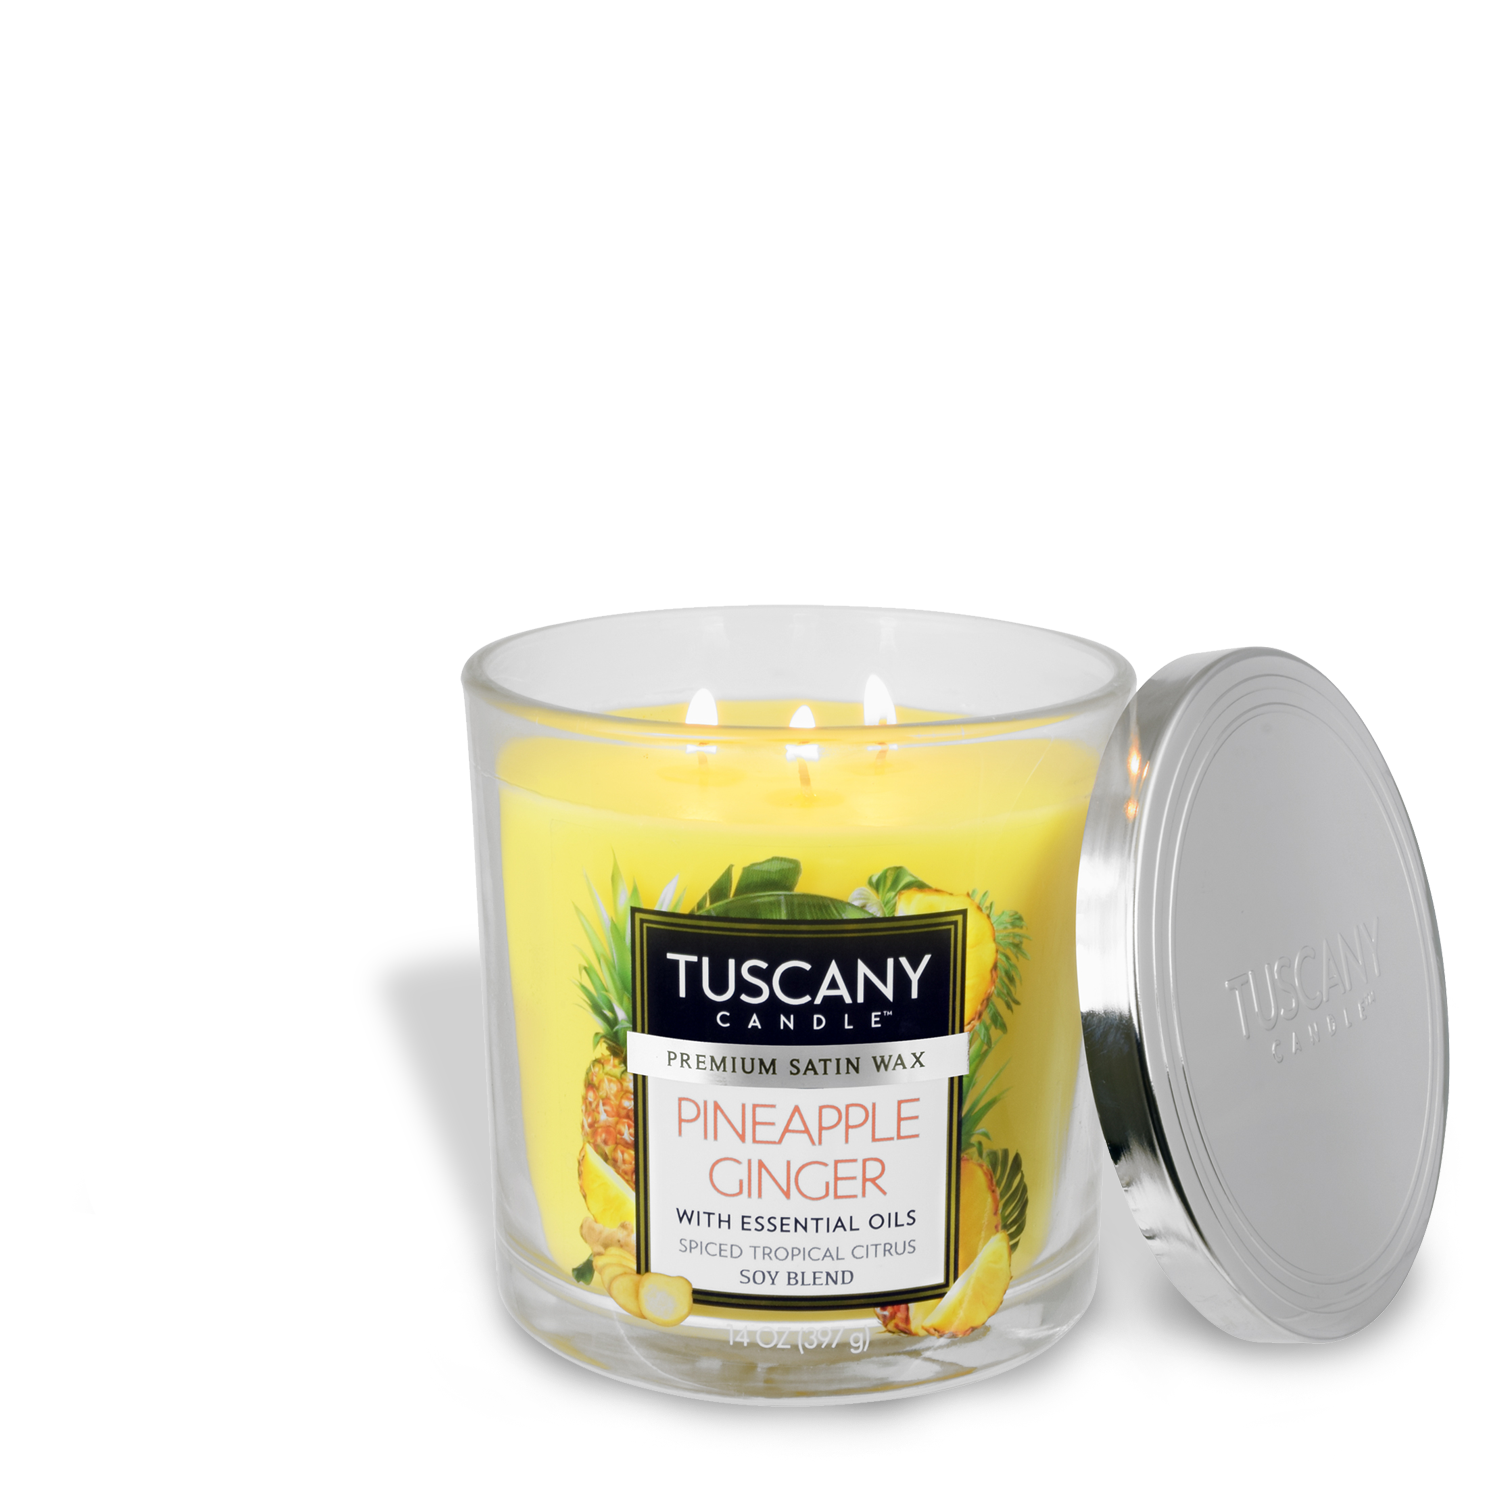 Indulge in the delightful fragrance of Tuscany Candle's Pineapple Ginger Long-Lasting Scented Jar Candle (14 oz), infused with essential oils for a captivating aroma experience.